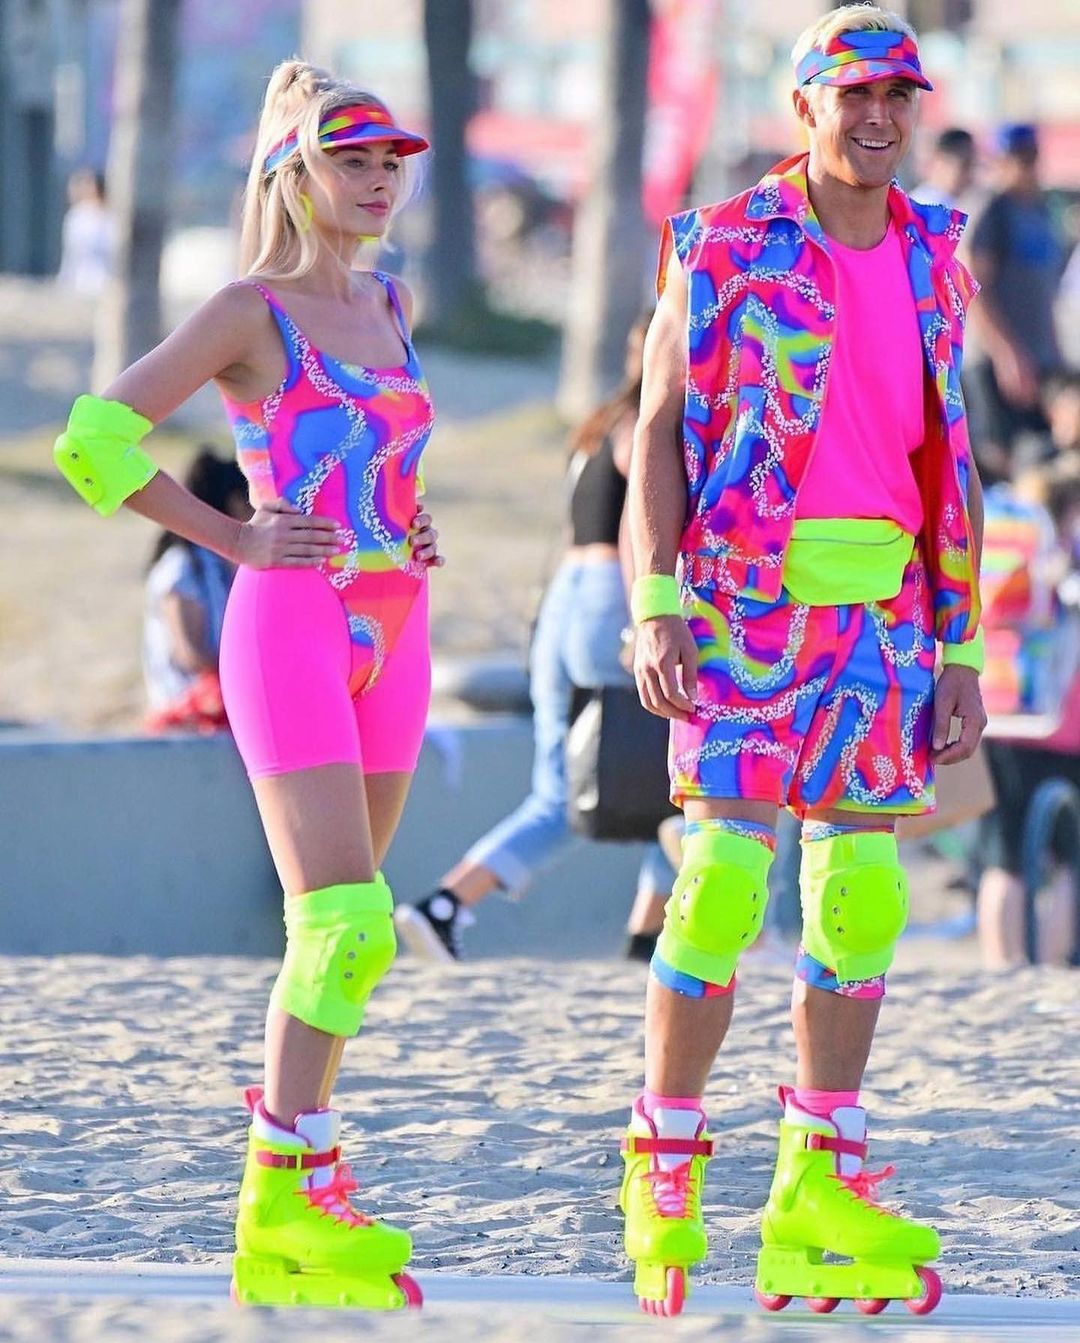 Barbie Skates iconic looks from the movie